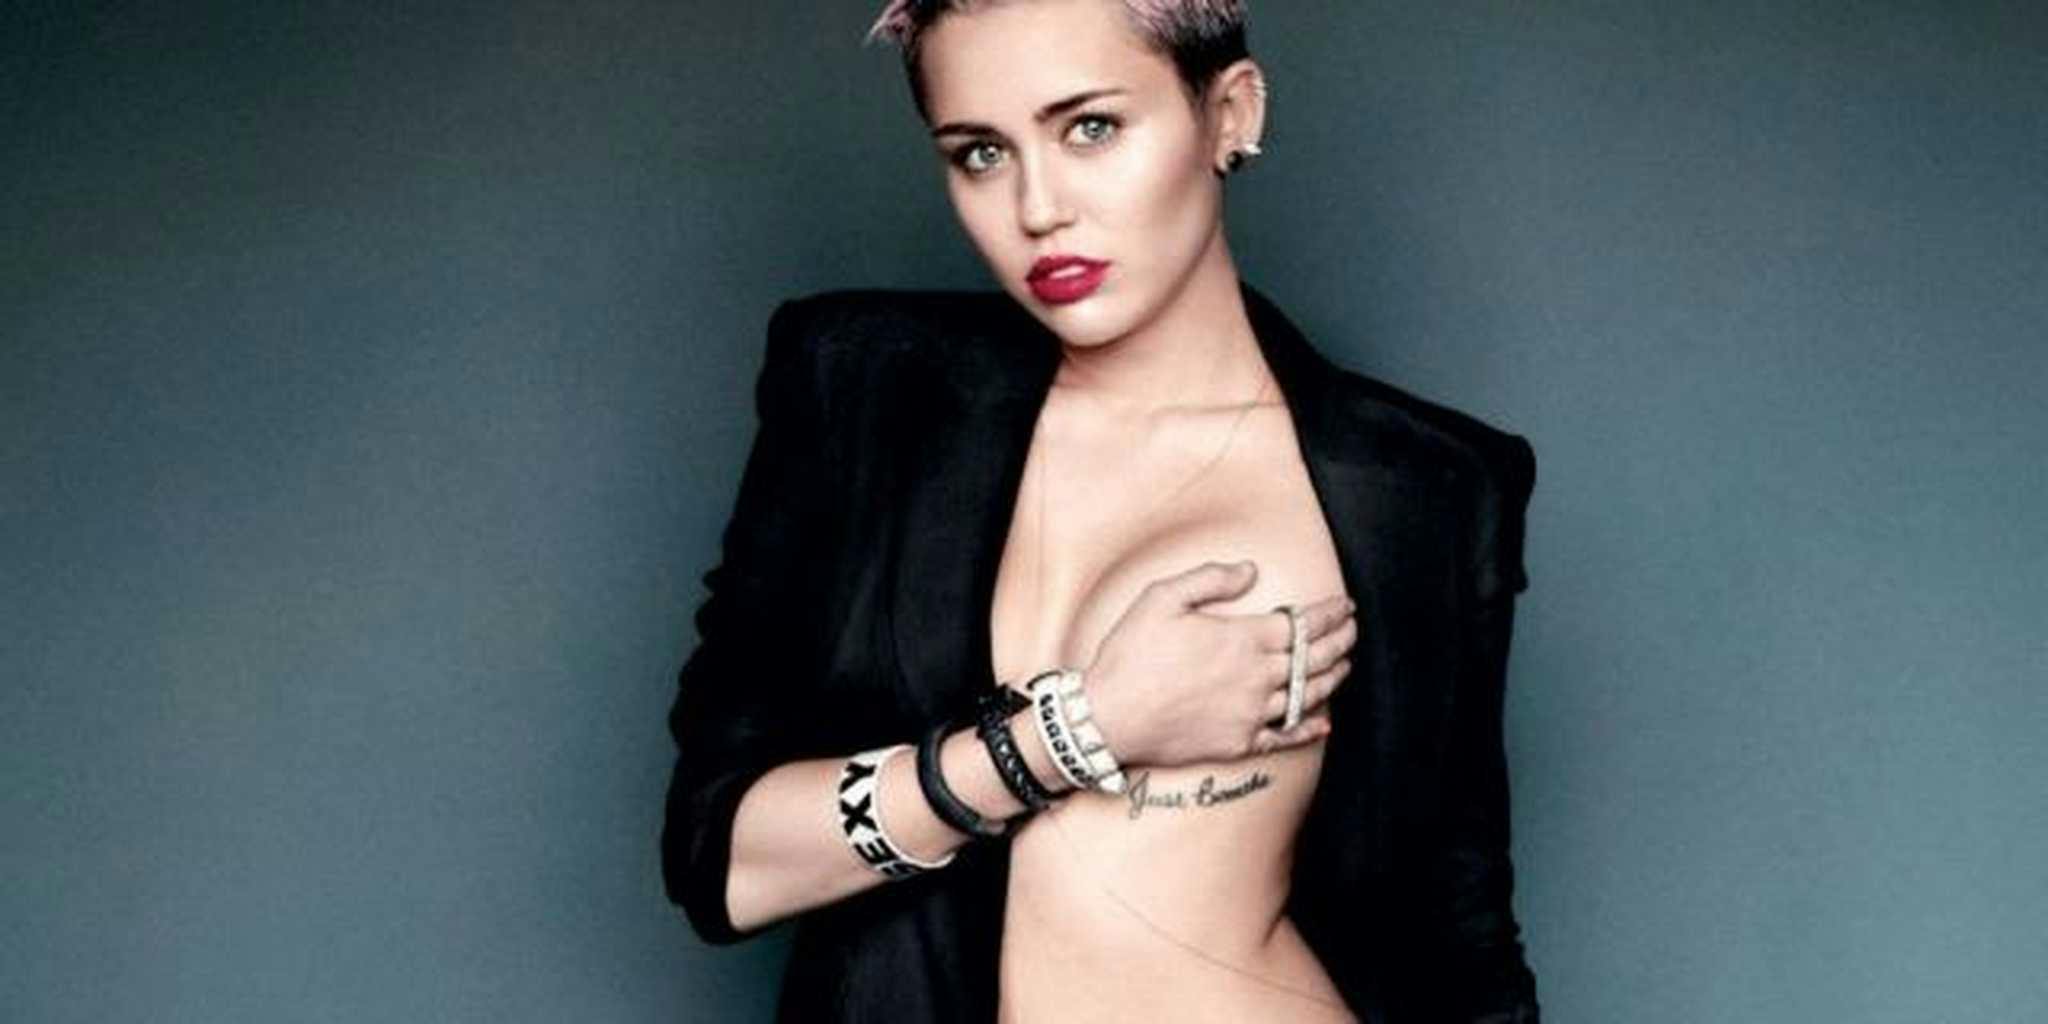 Miley Cyrus goes full Miley Cyrus in new topless photo